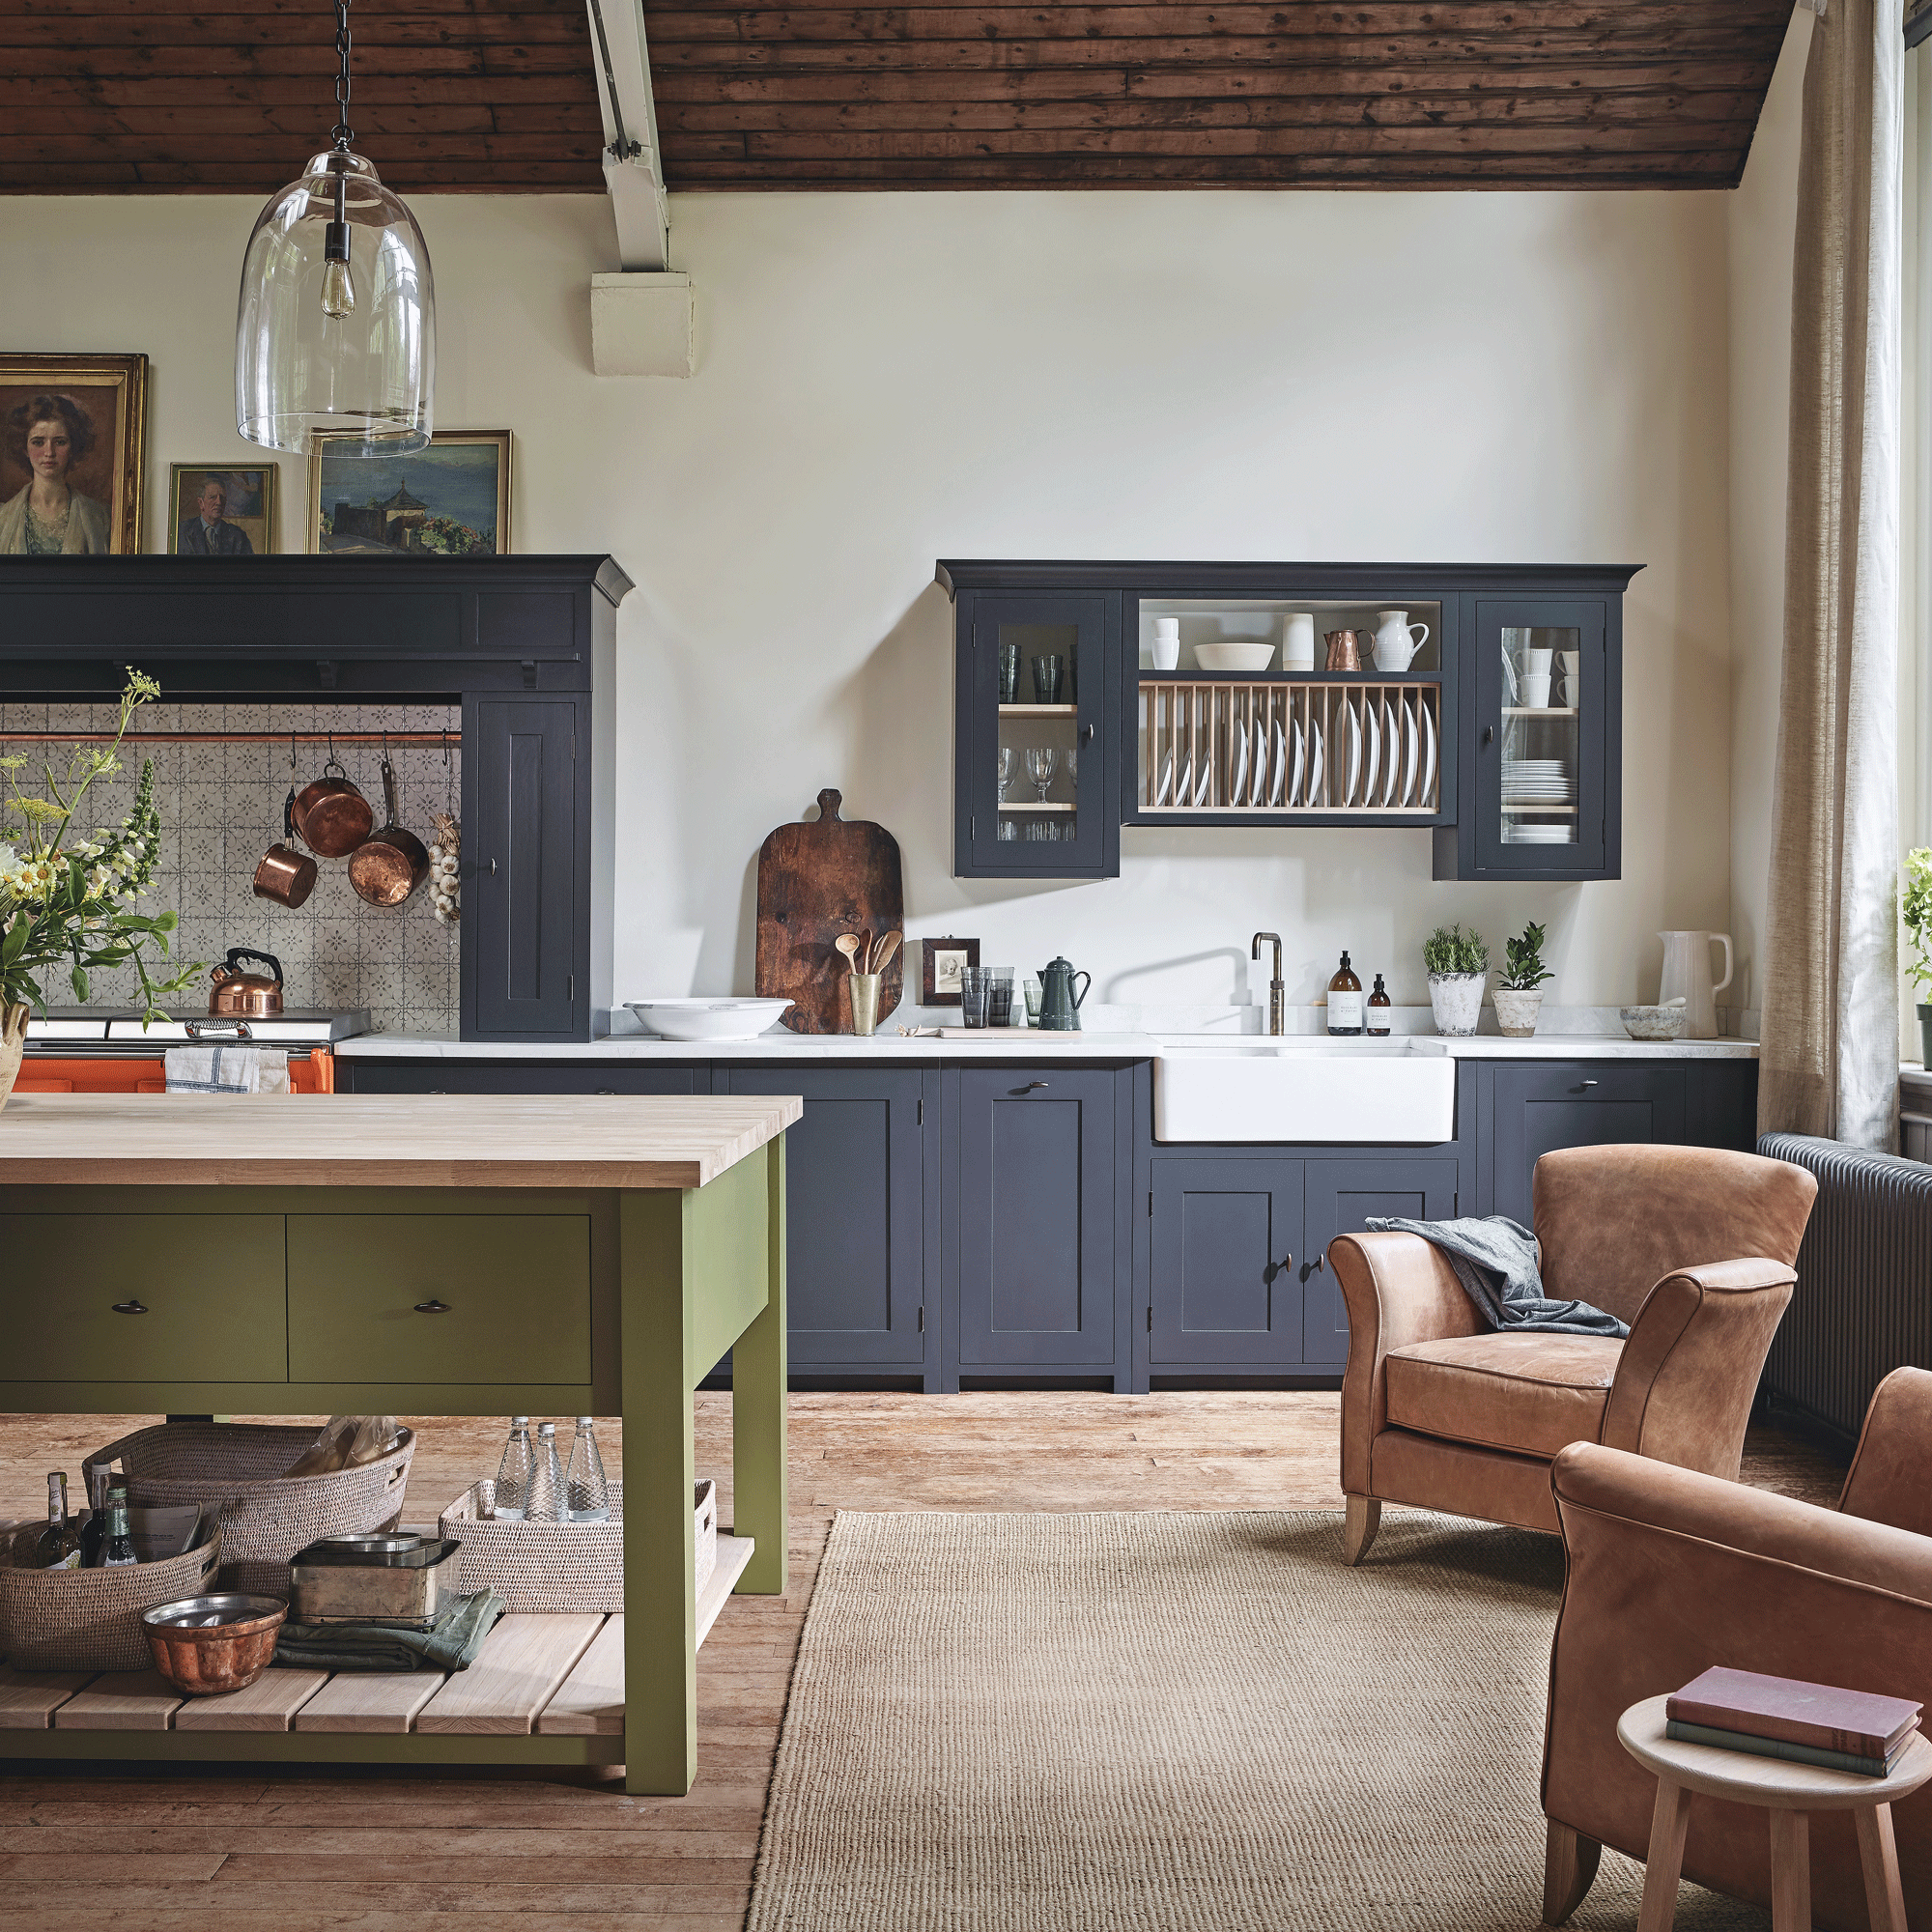 Blue kitchen with green island and separate seating area with two chairs and a rug